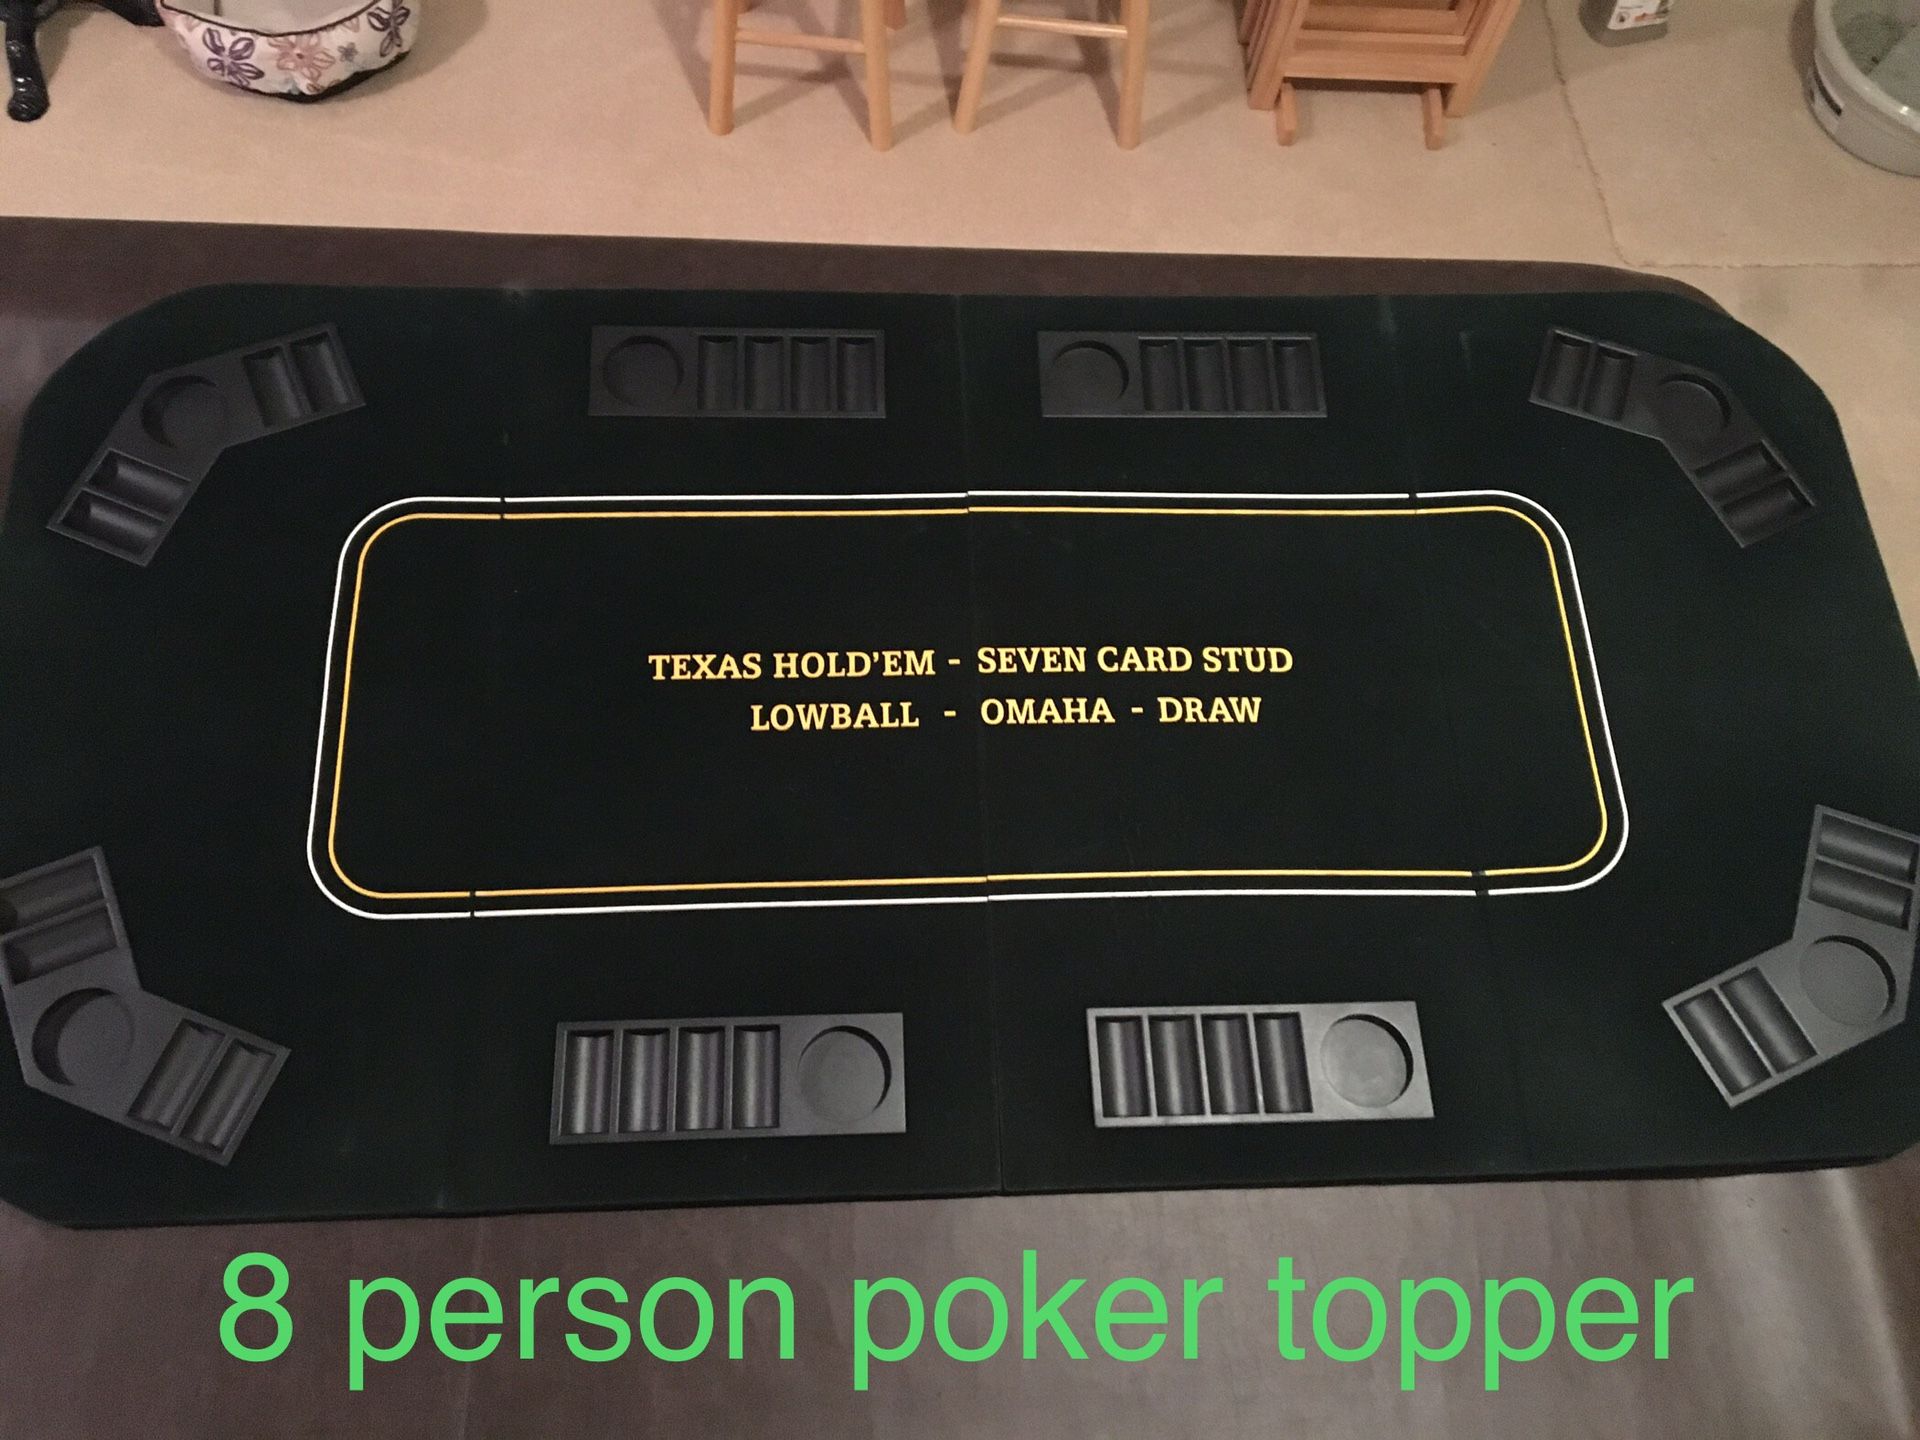 Excellent condition rectangle poker table topper